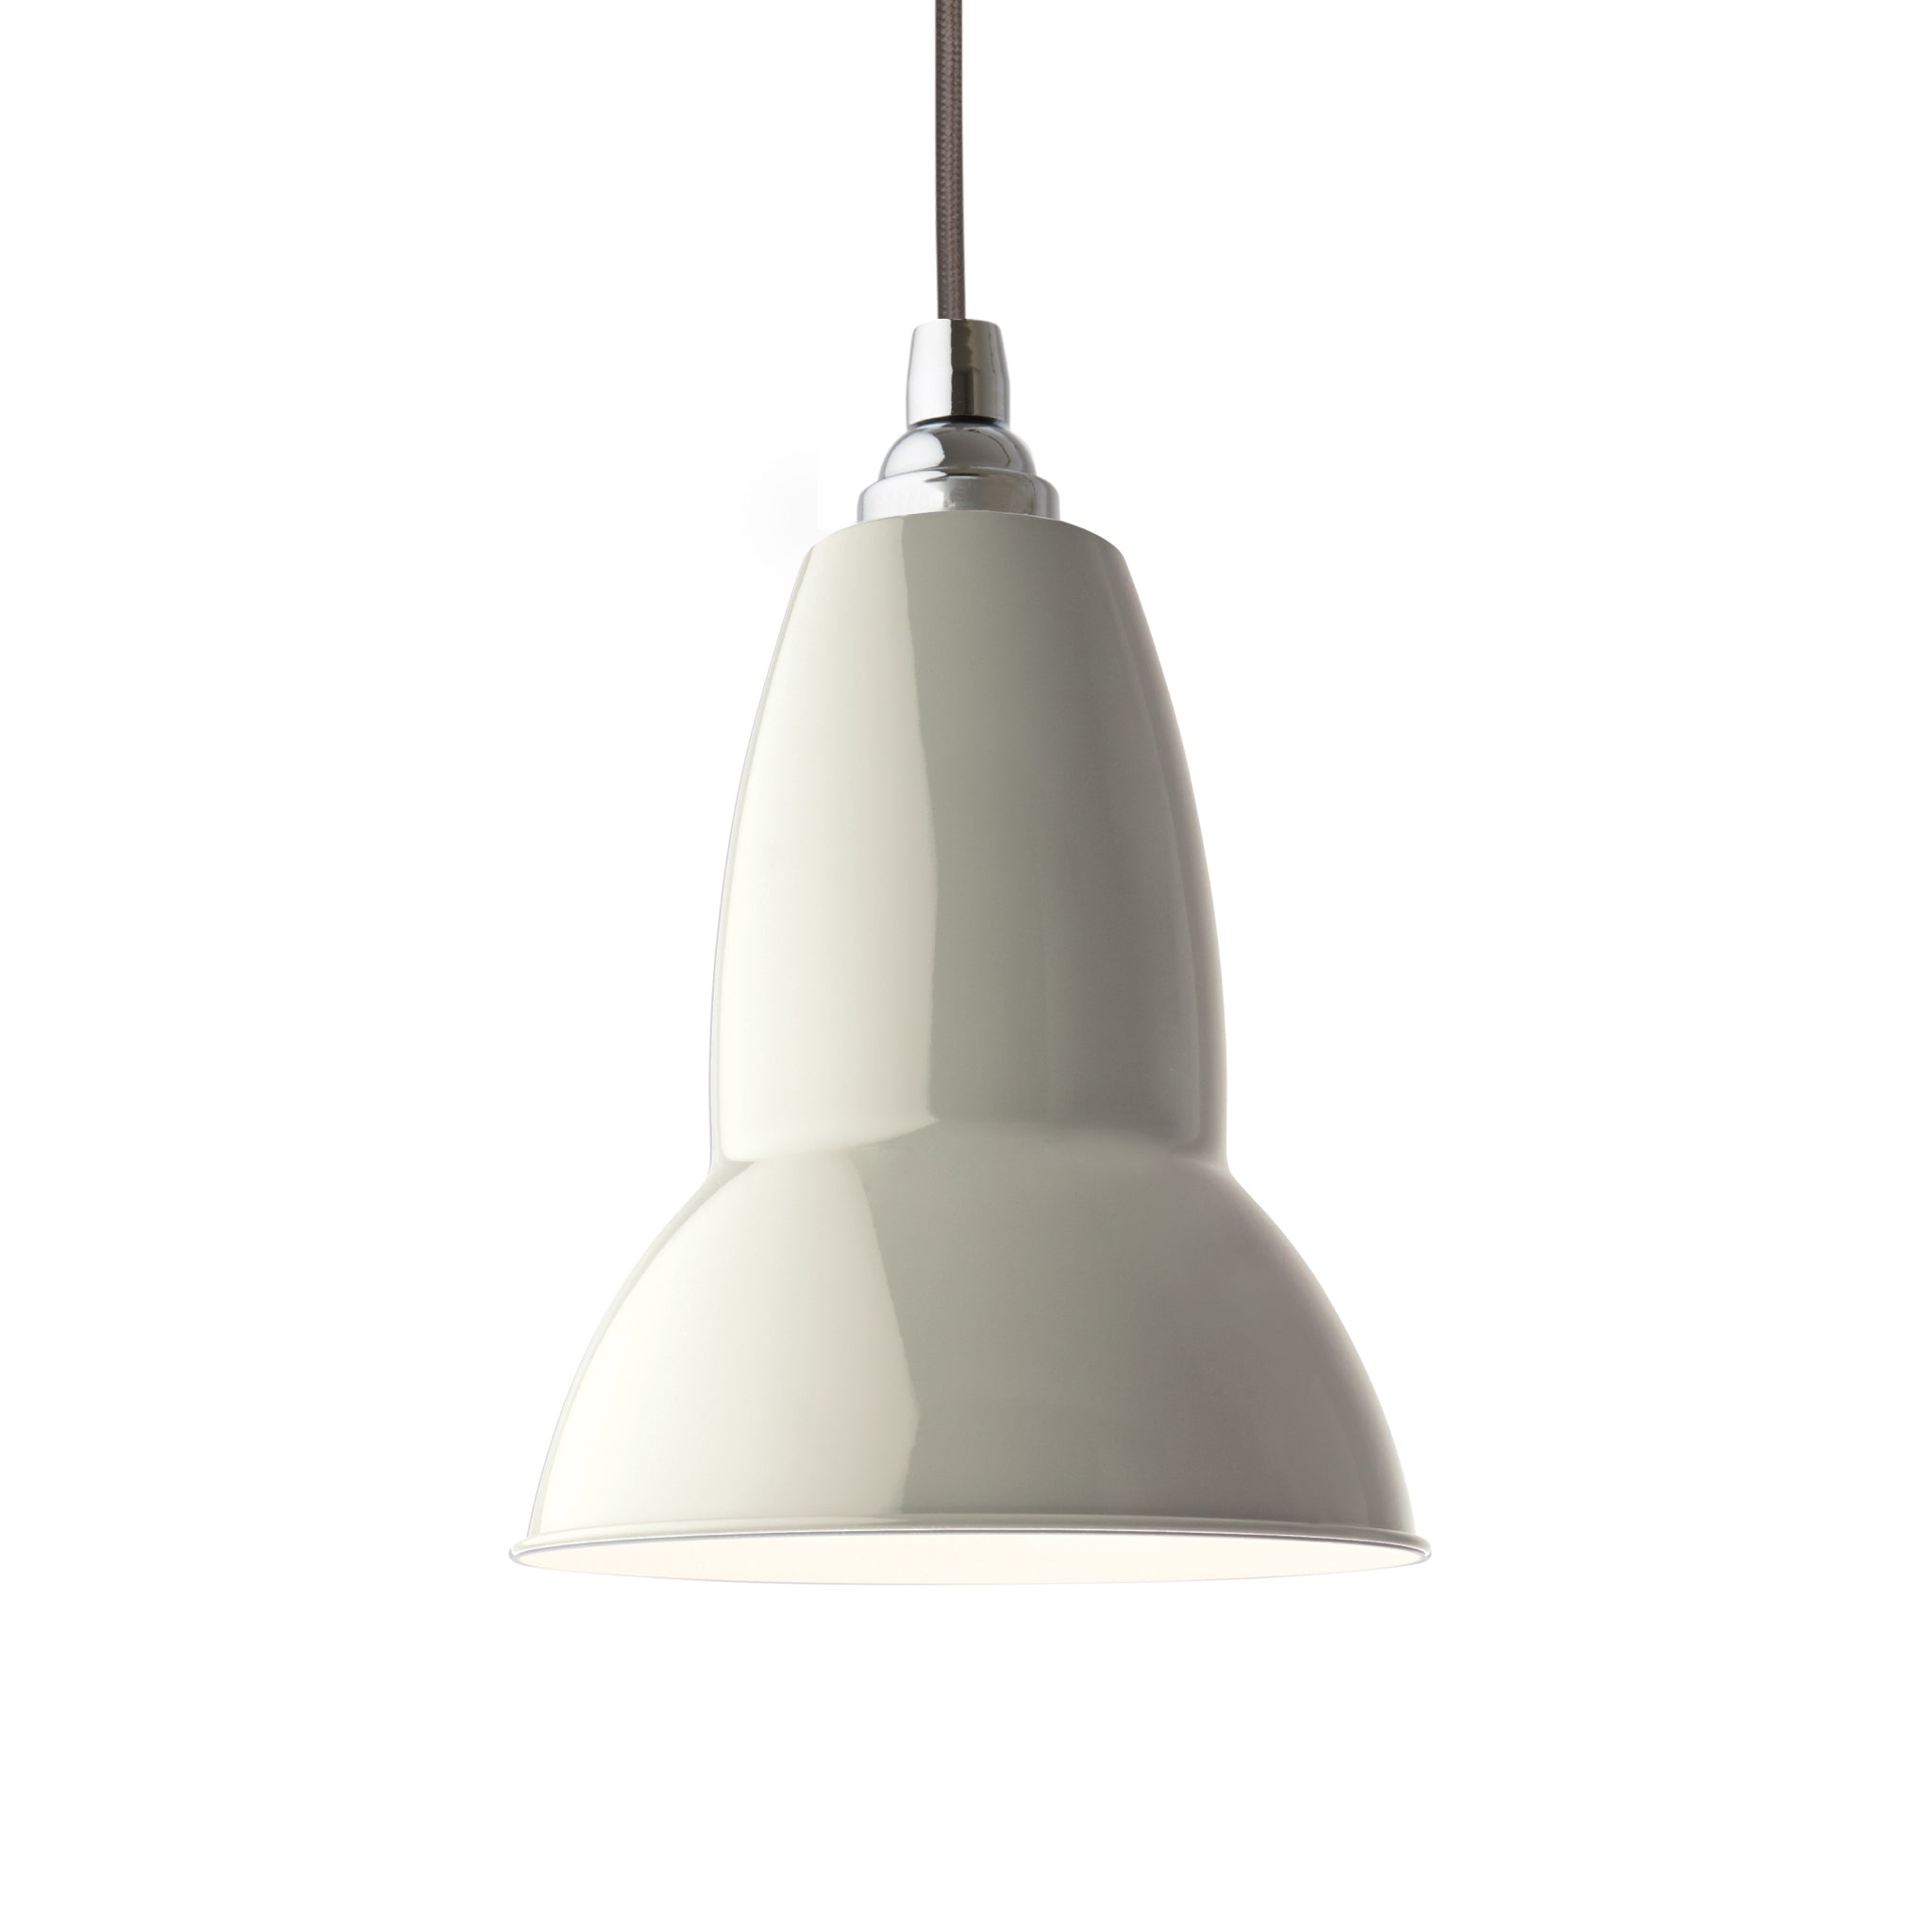 Original 1227 Pendant by Anglepoise